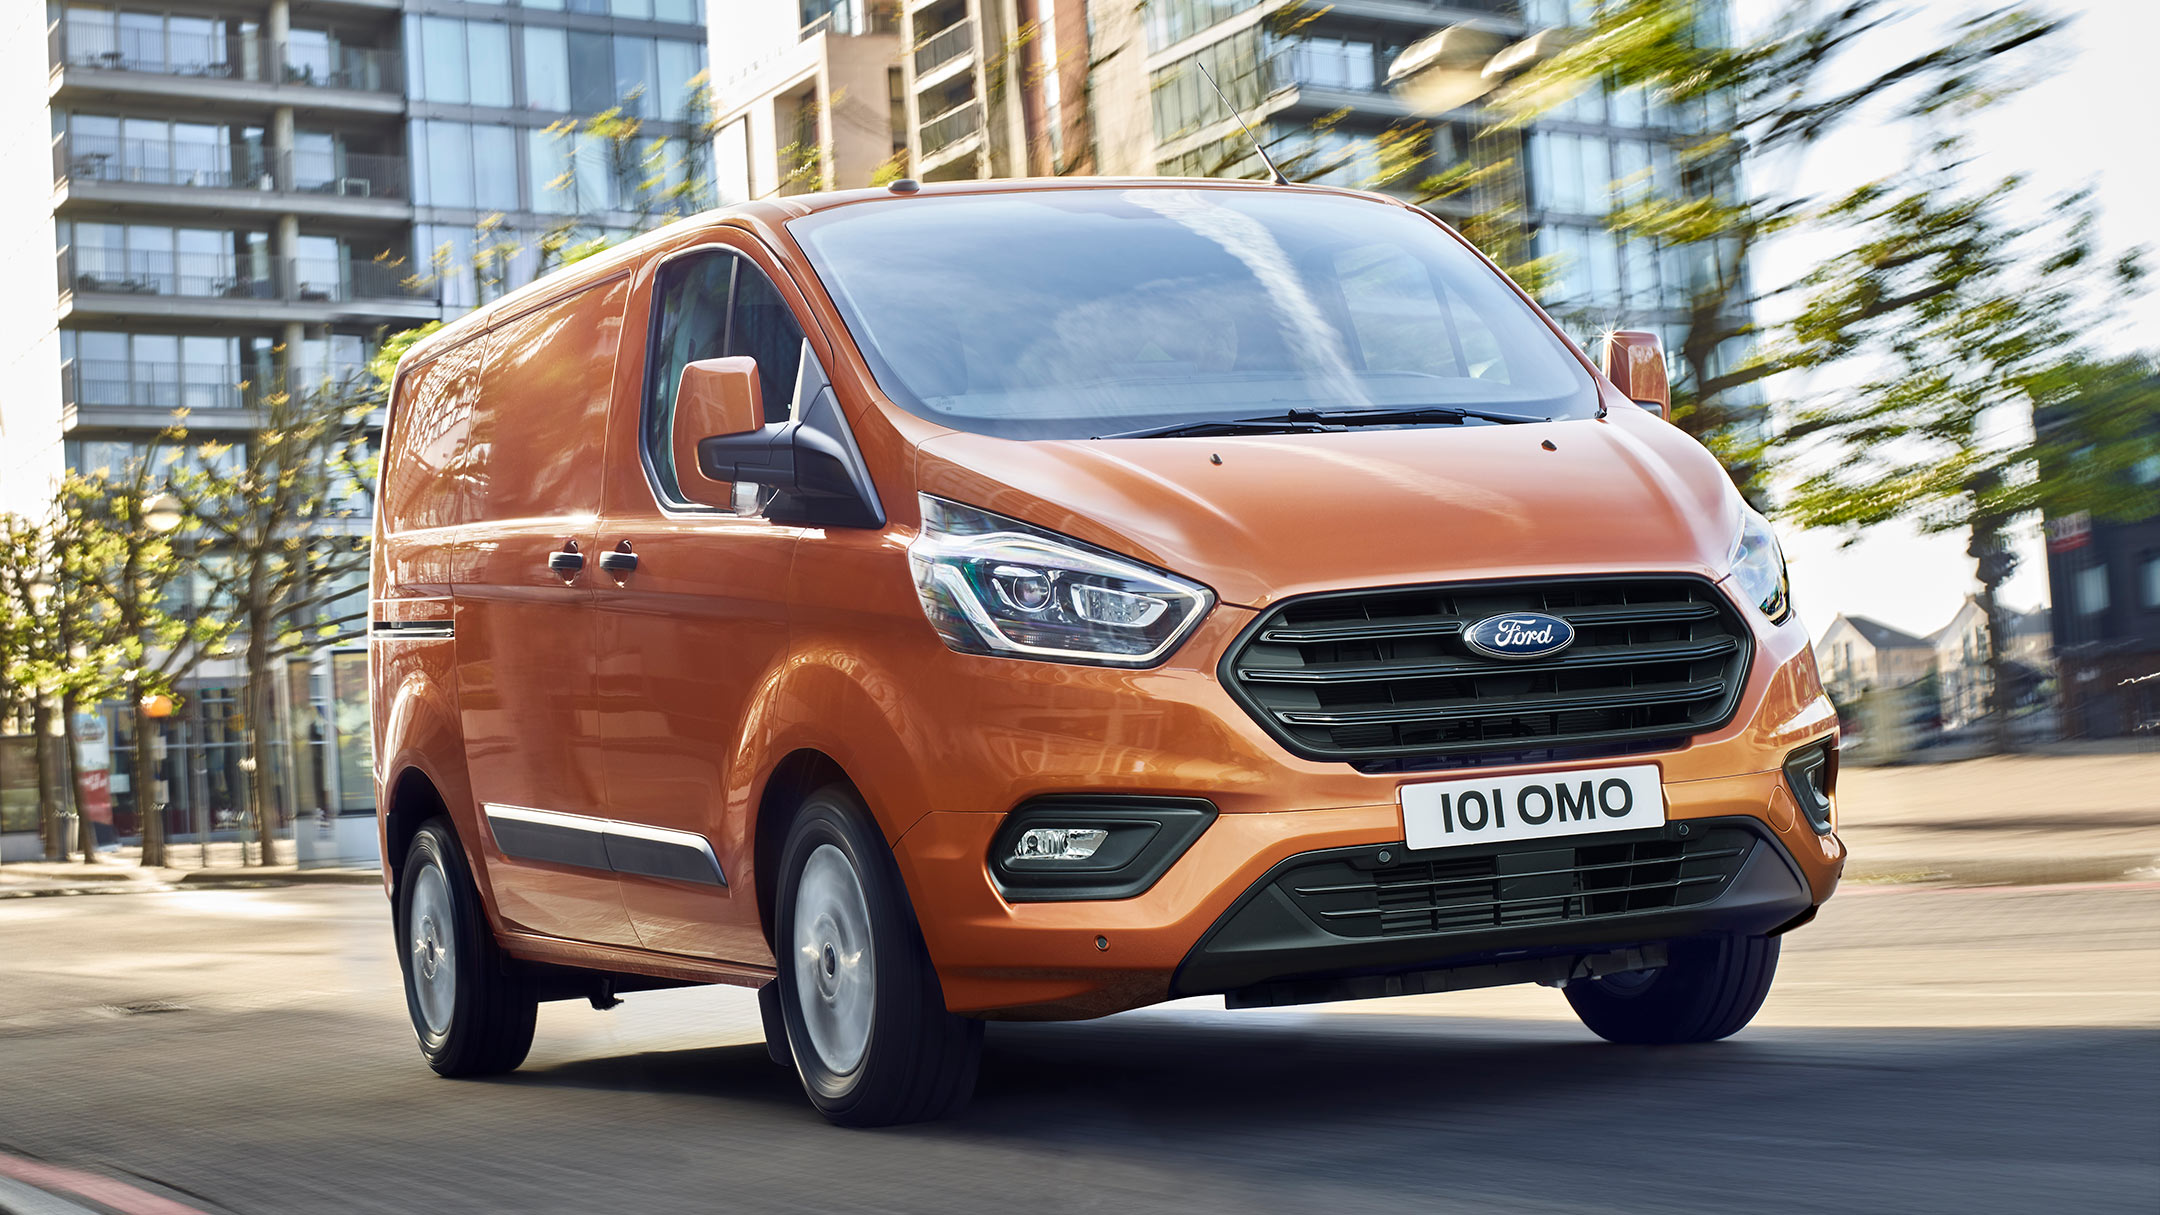 New Ford Transit Custom PHEV driving on road